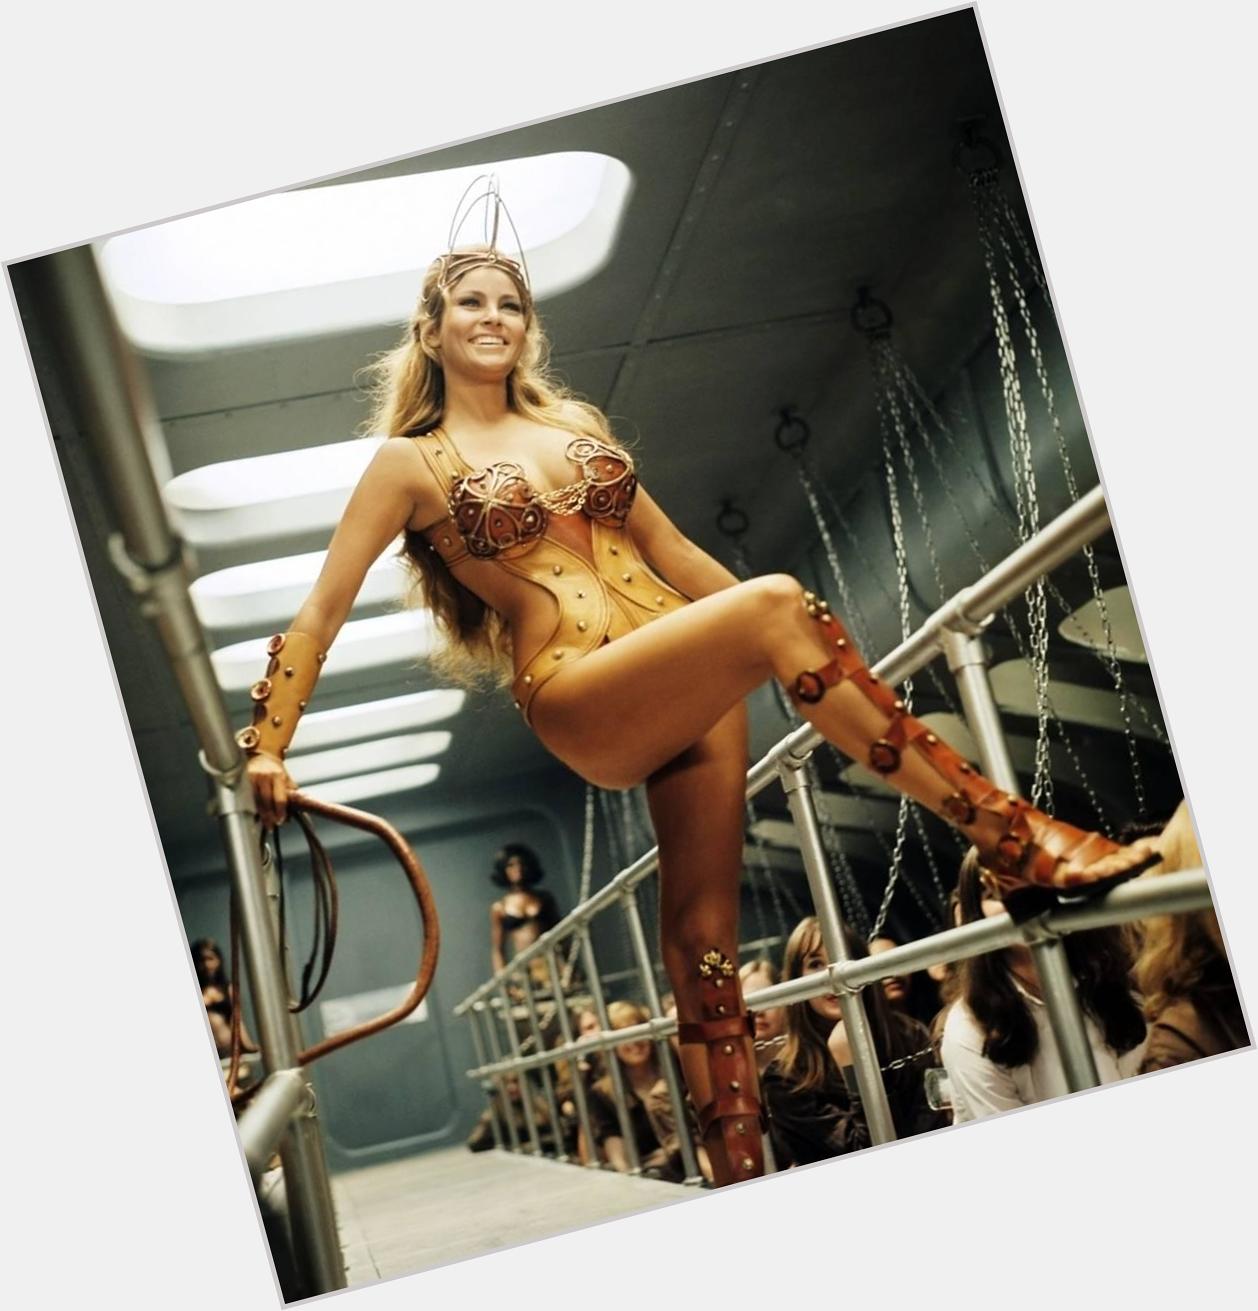 A belated Happy Birthday to Raquel Welch! 